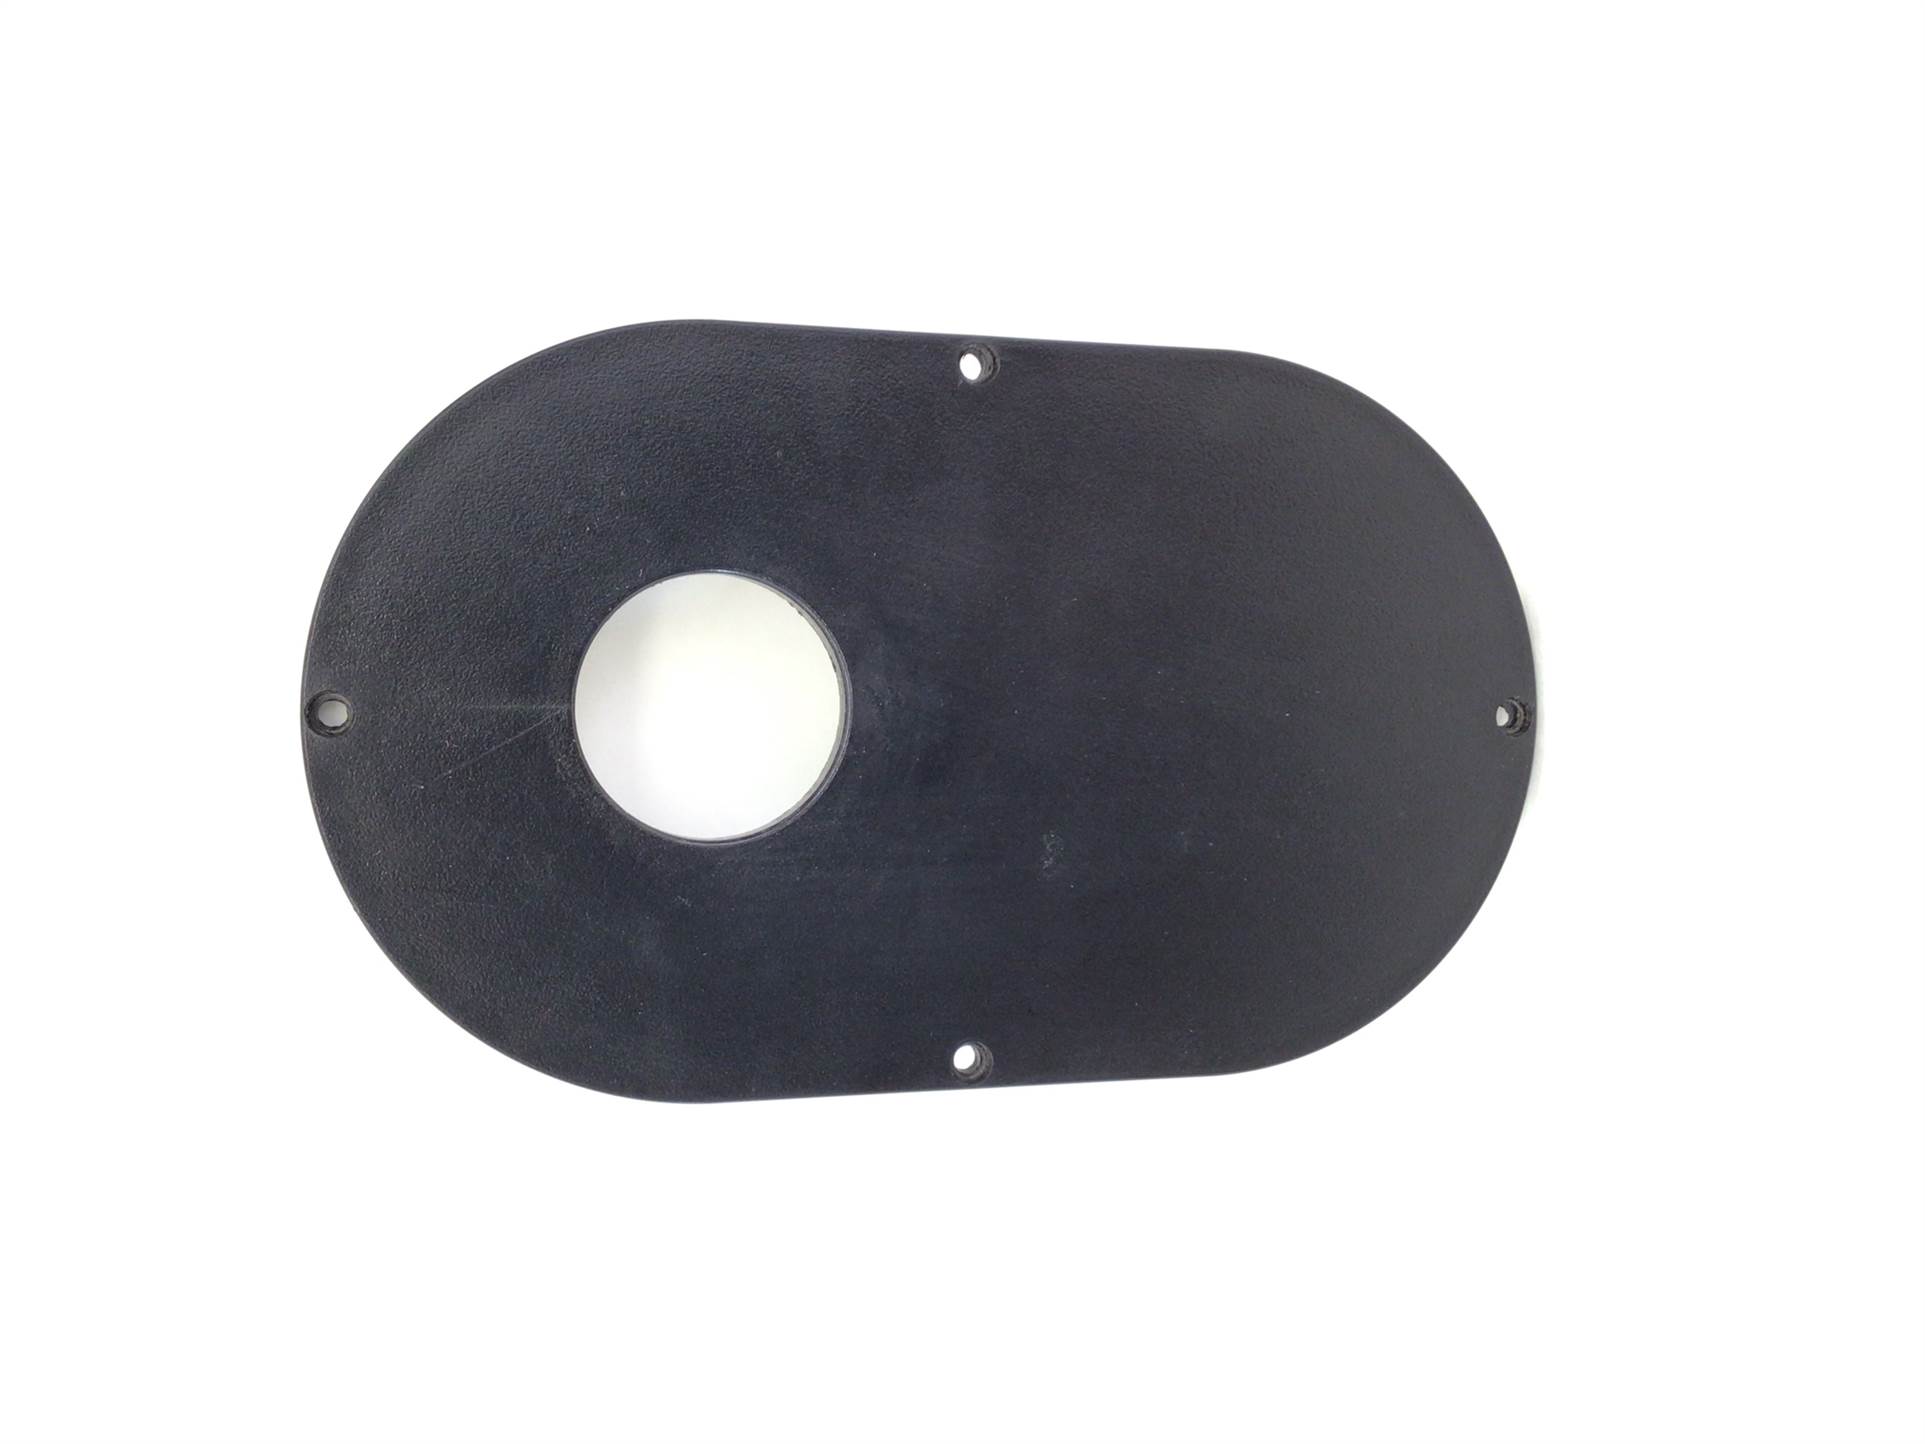 Oval Plastic Plate With Circular Hole - Crank Cover (Used)